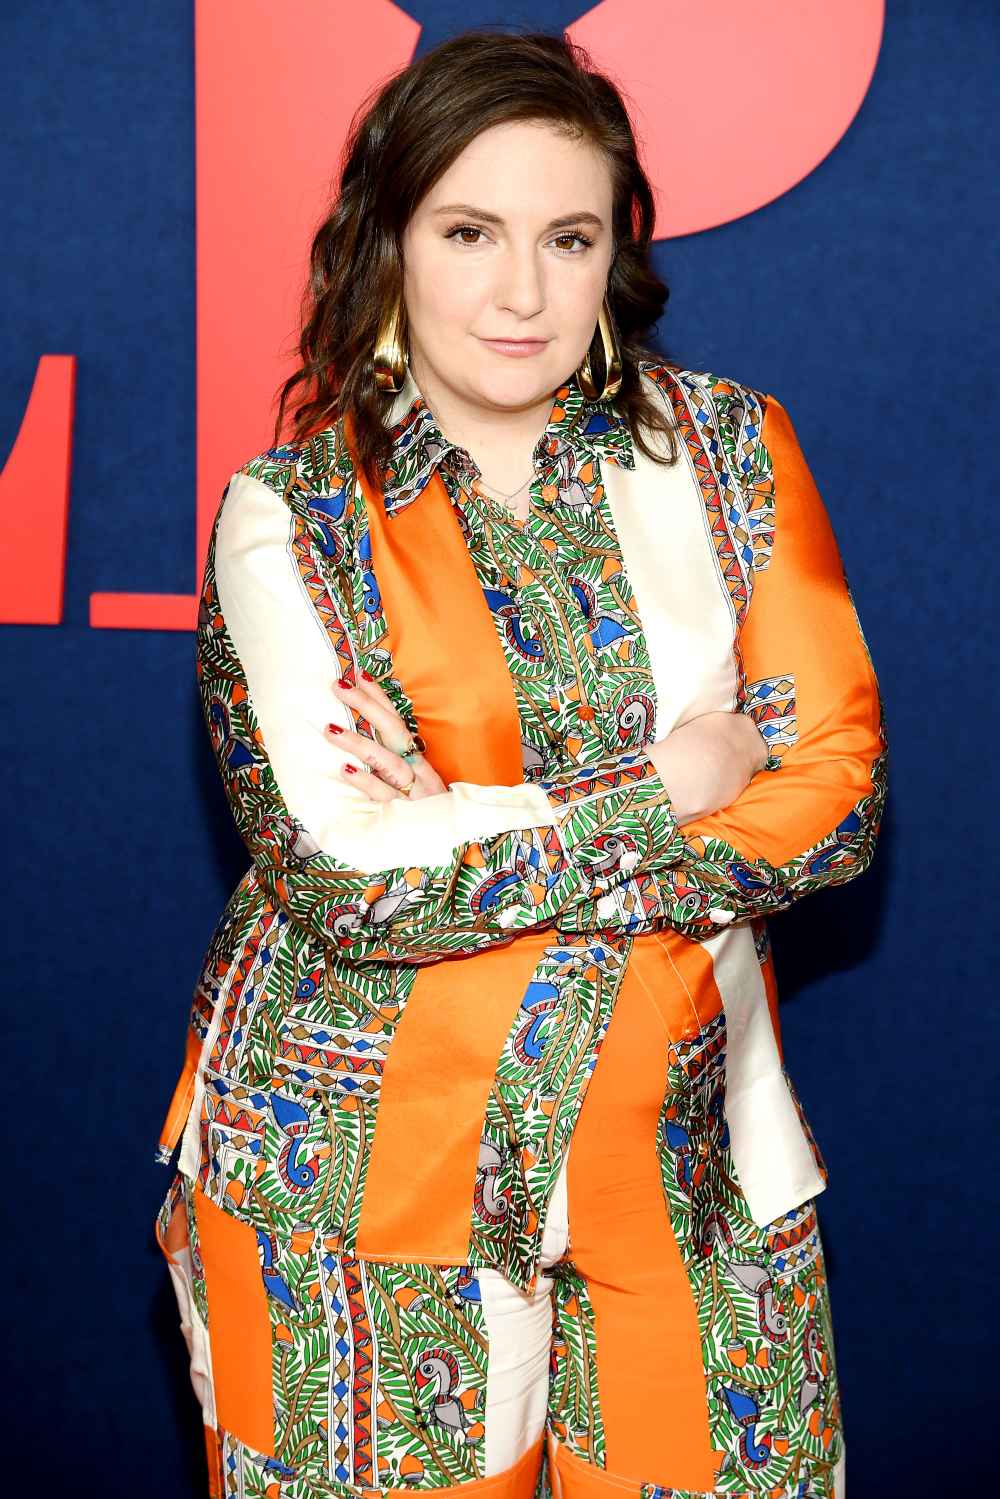 Lena Dunham Gets Neck Tattoo of What She’s ‘Most Scared of Being Called’